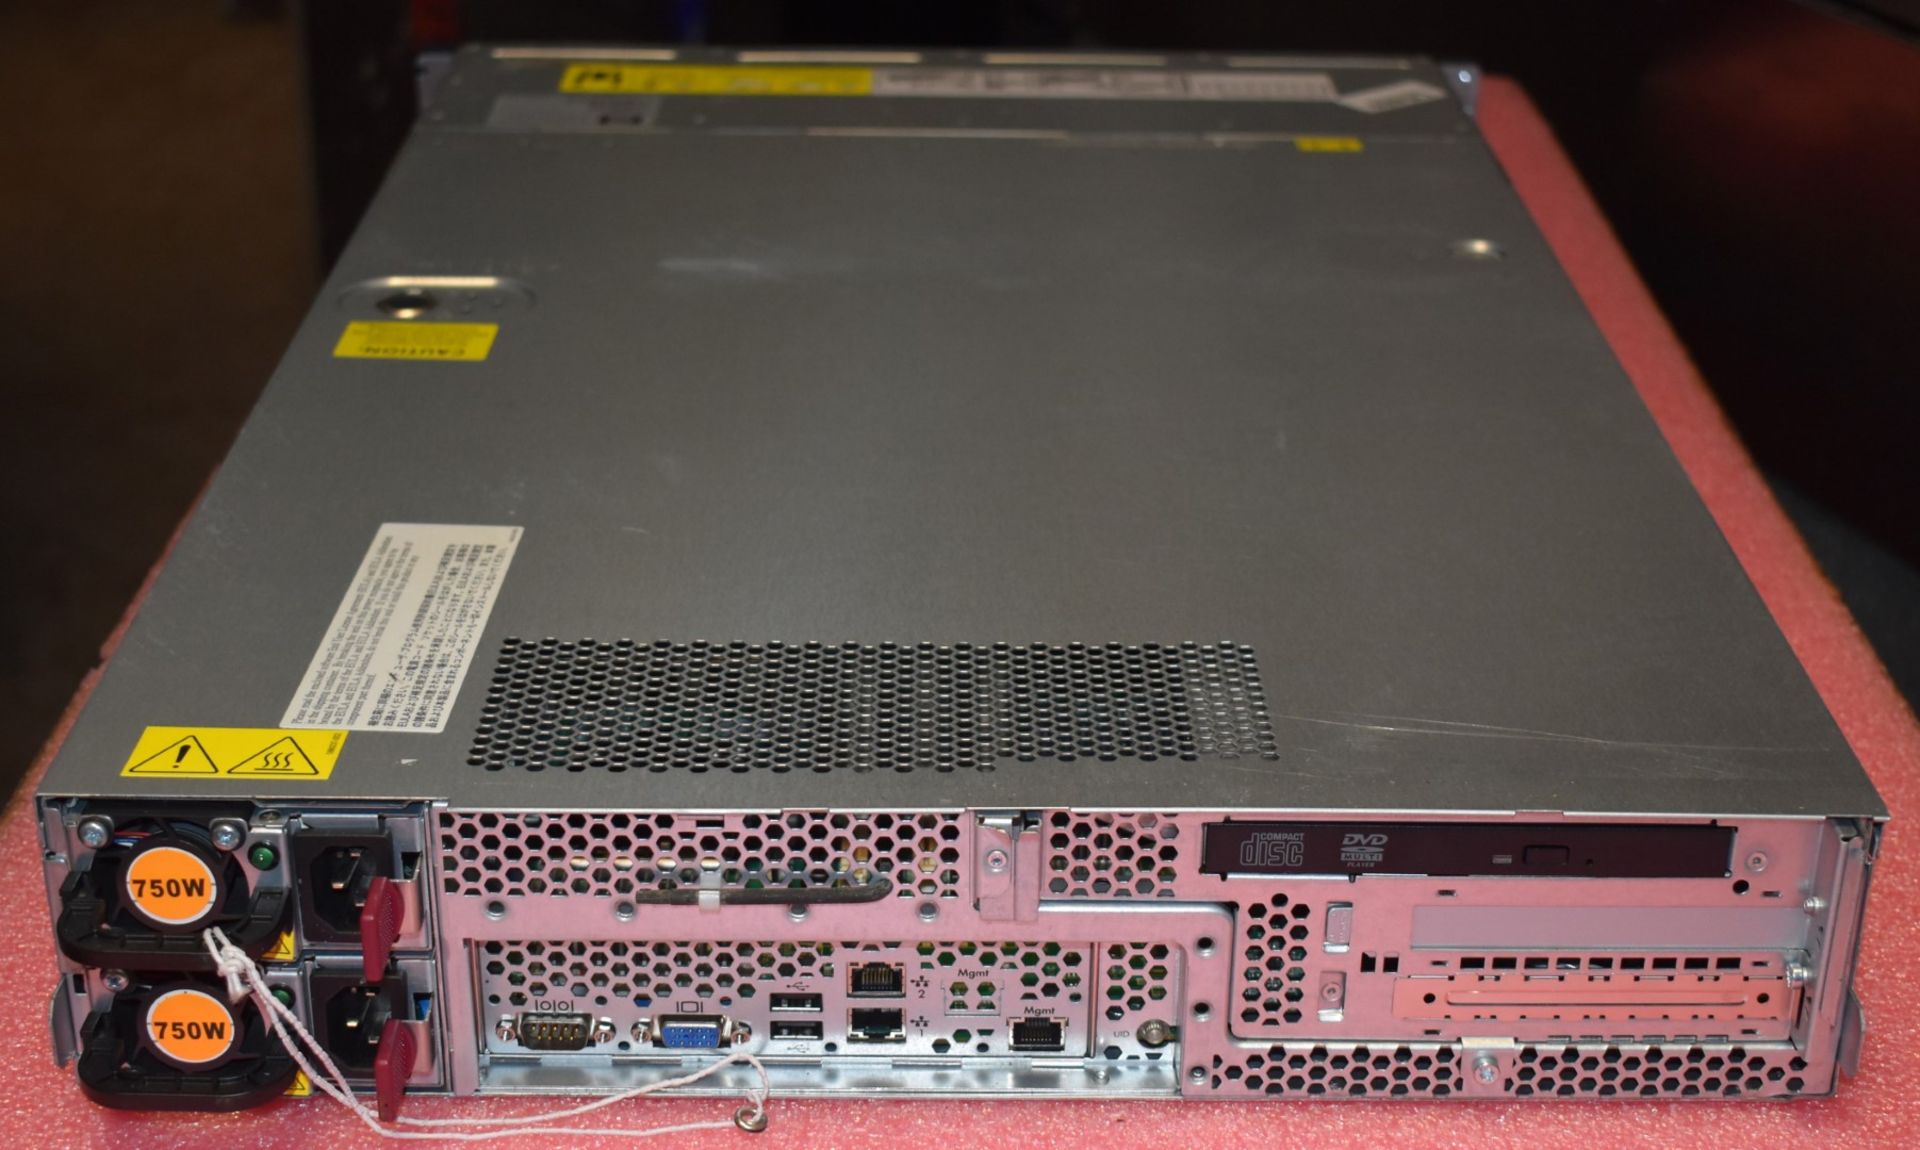 1 x HP StorageWorks P4500 G2 Storage Server - Ref LD469 - CL409 - Hard Disk Drives Not Included - - Image 5 of 10